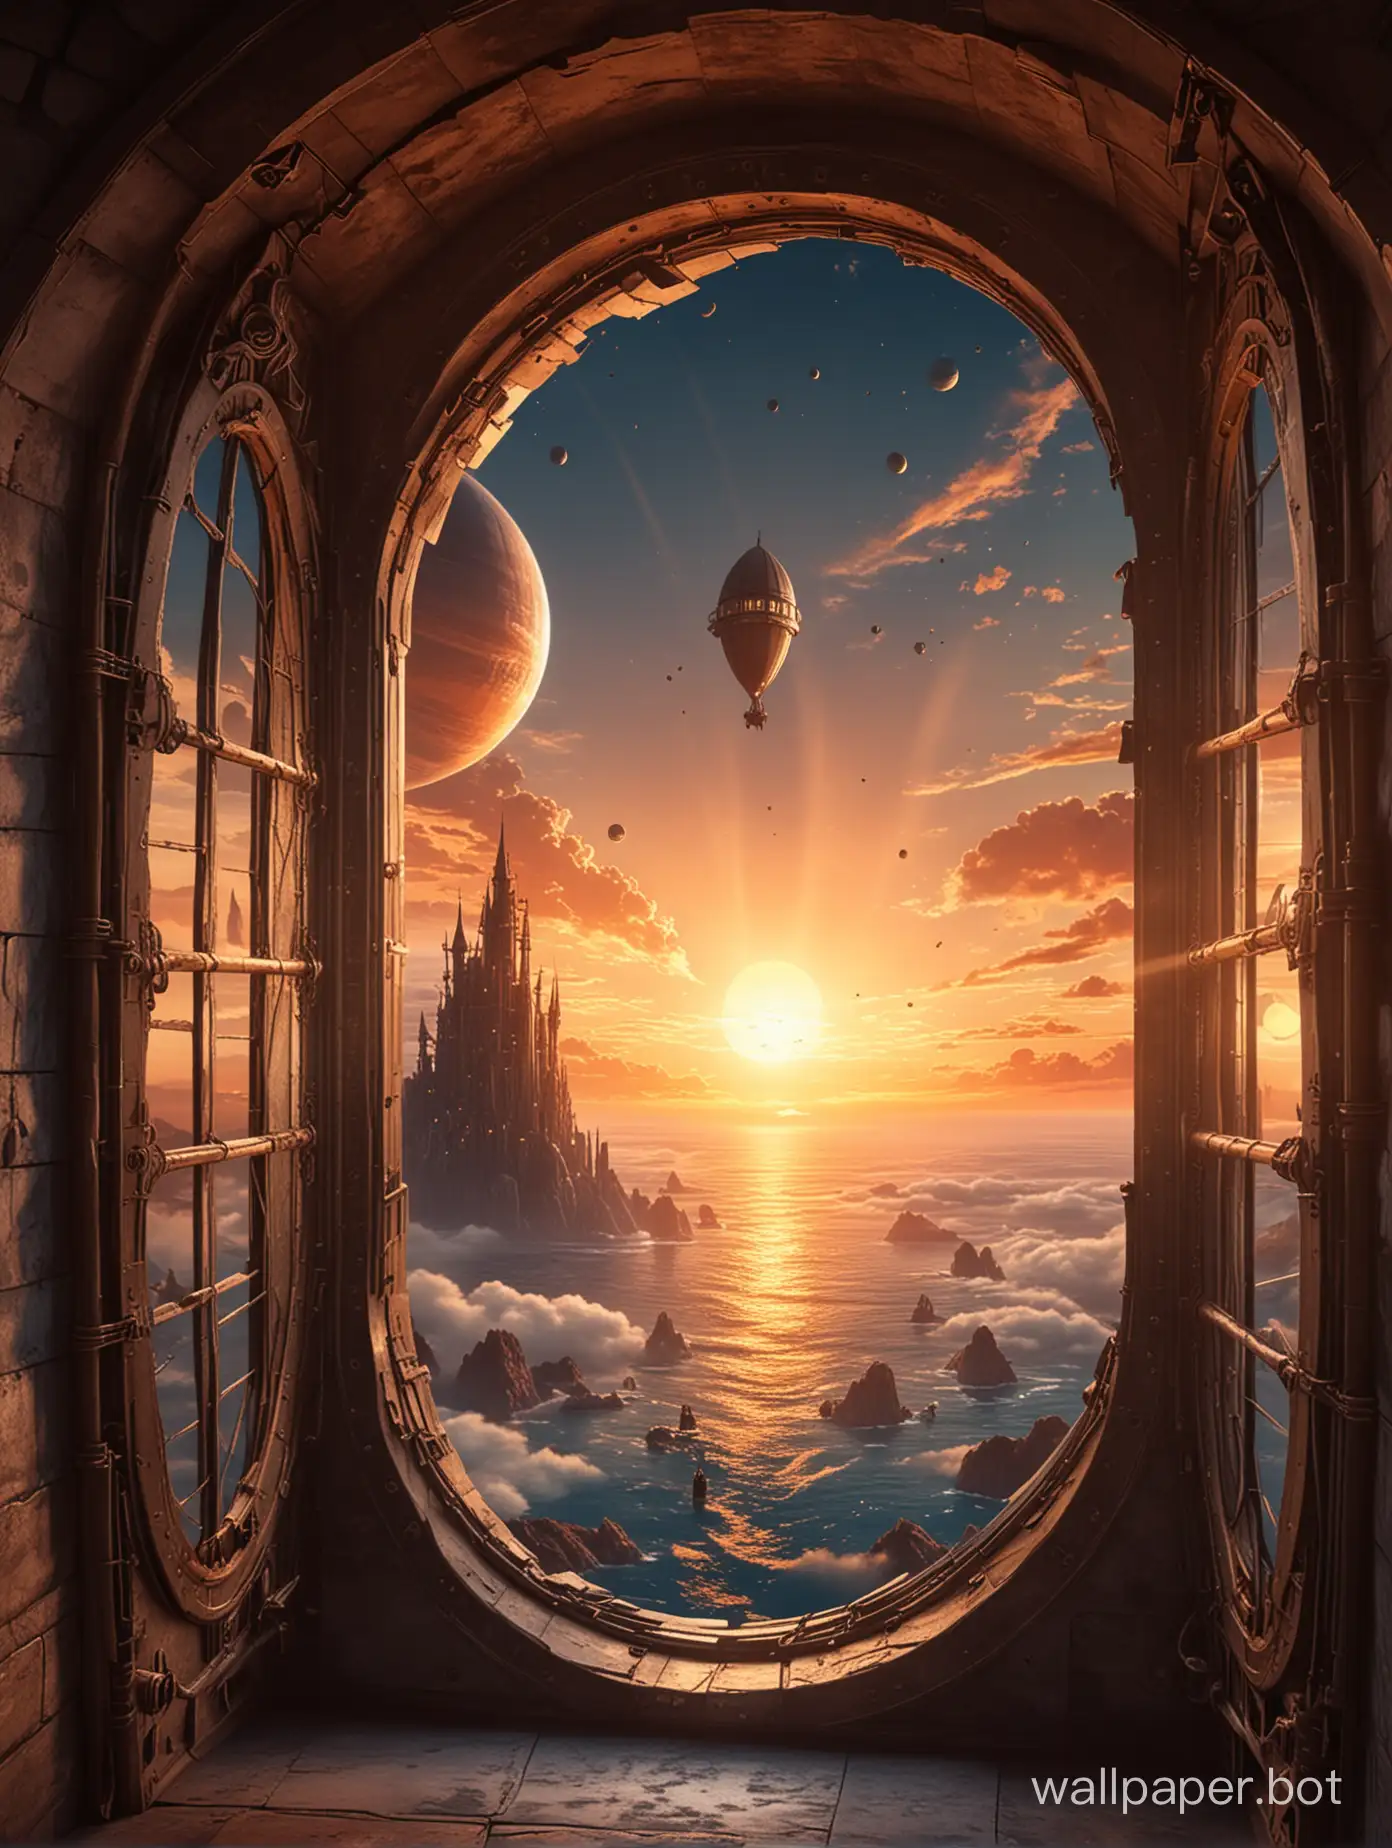 A narrow window into a fantastic space with a planet. fantastic tower against sunset background. There is an airship with sails in the sky. High resolution. Very definition.  sci-fi. Anime. Steampunk.